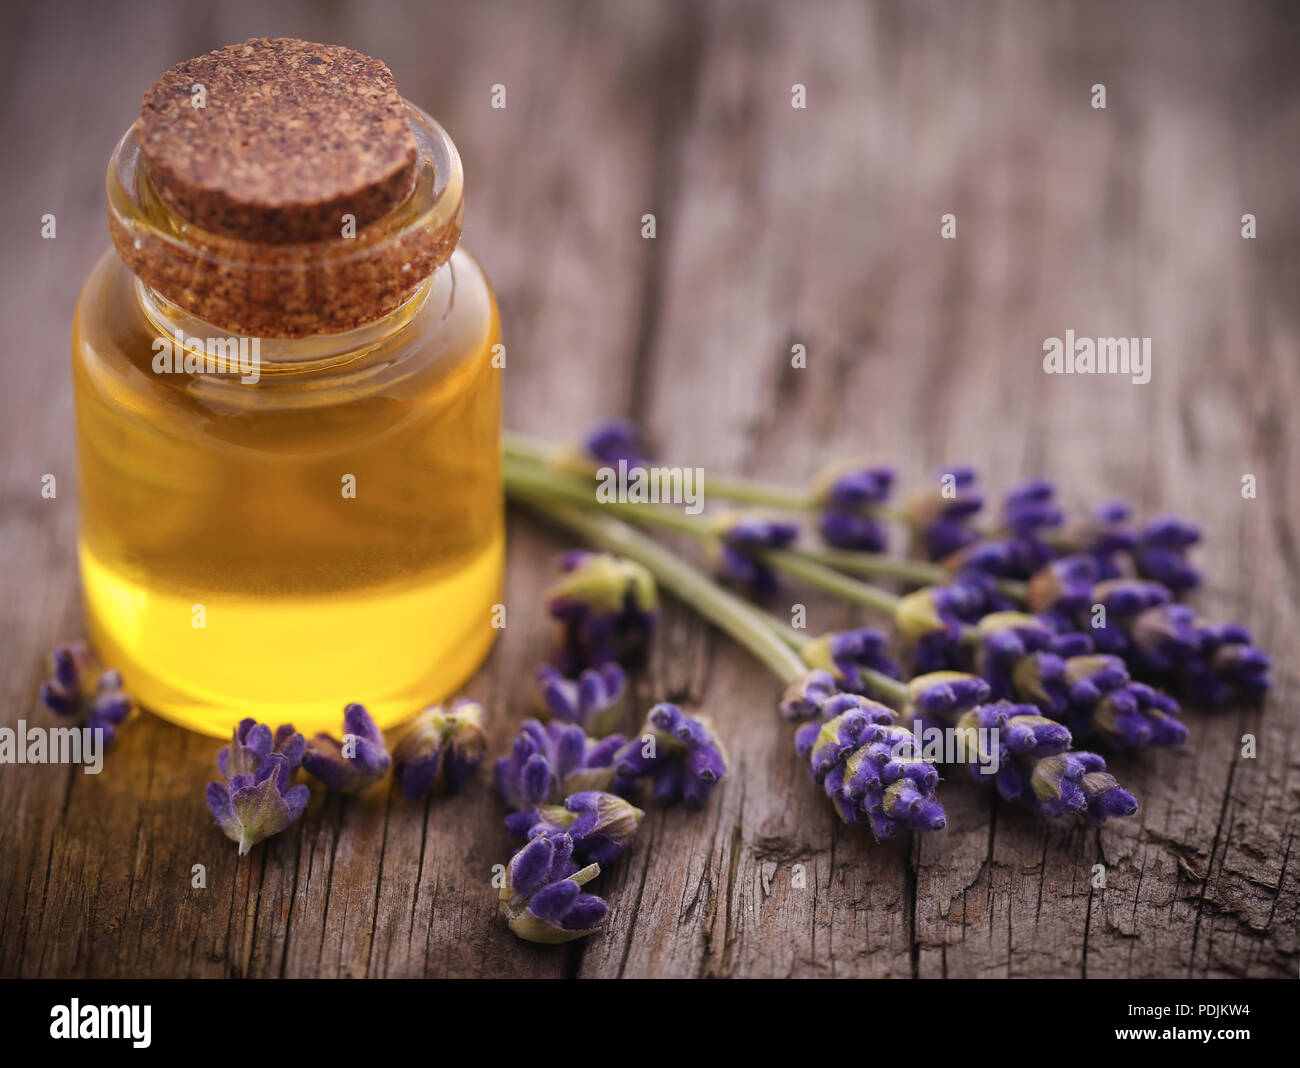 Lavender oil with flower on wooden surface Stock Photo